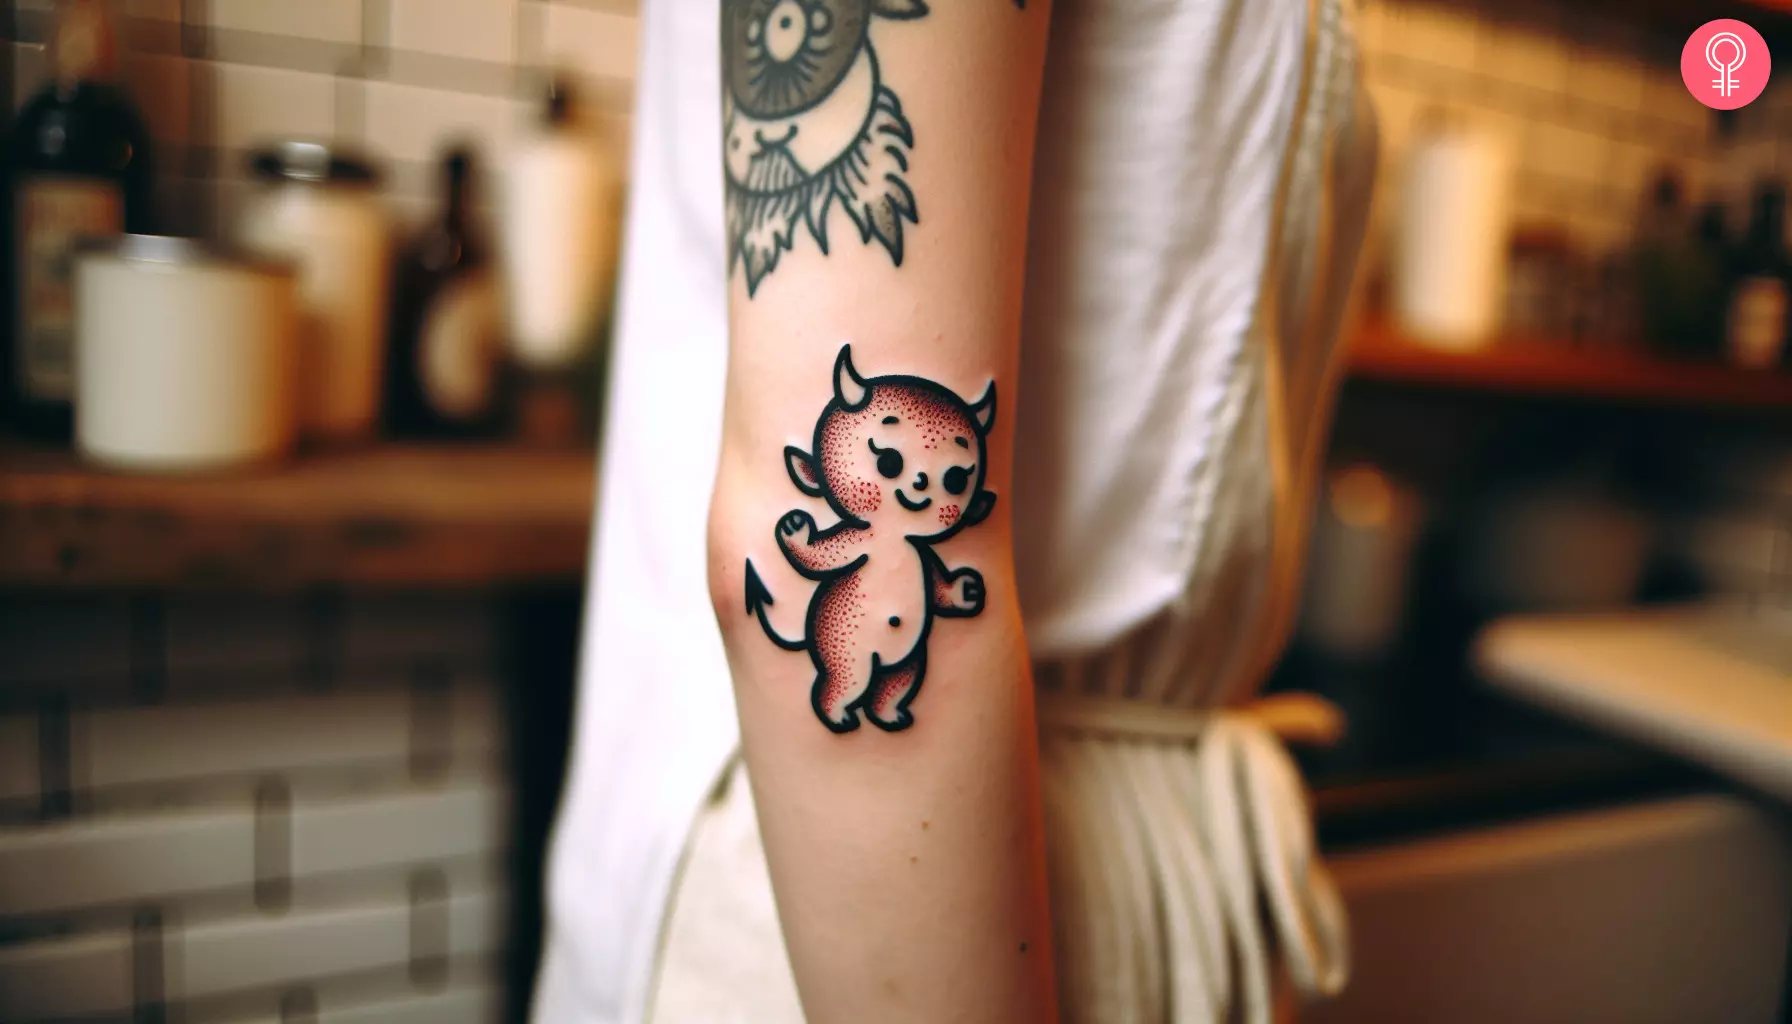 A baby devil tattoo on the arm